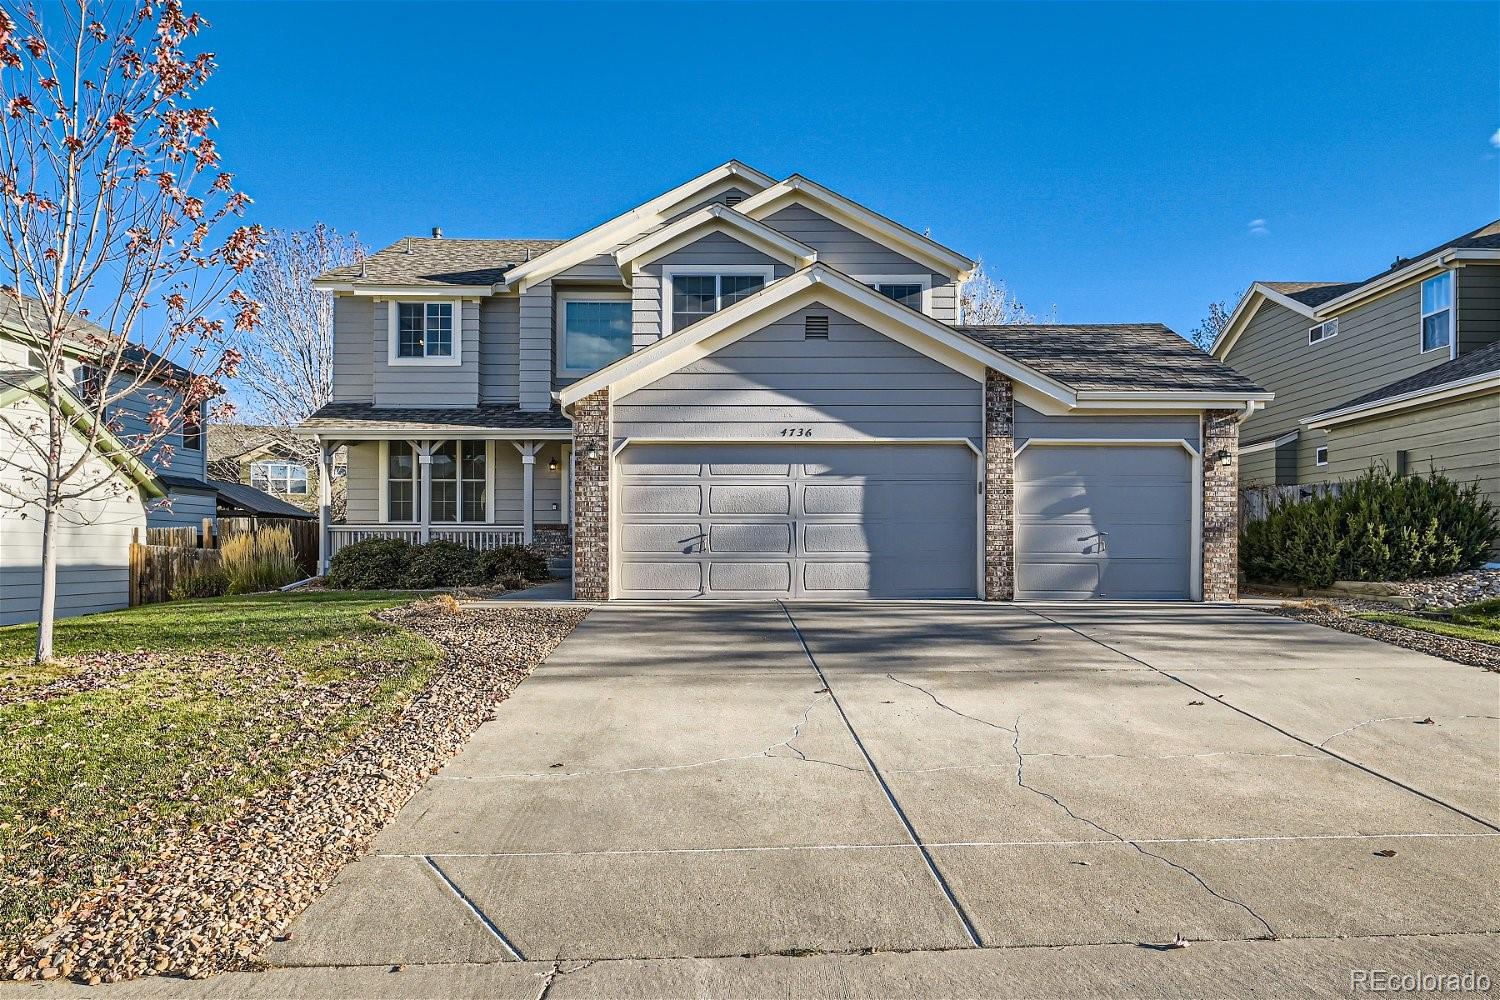 4736 s cathay court, Aurora sold home. Closed on 2023-12-29 for $650,000.